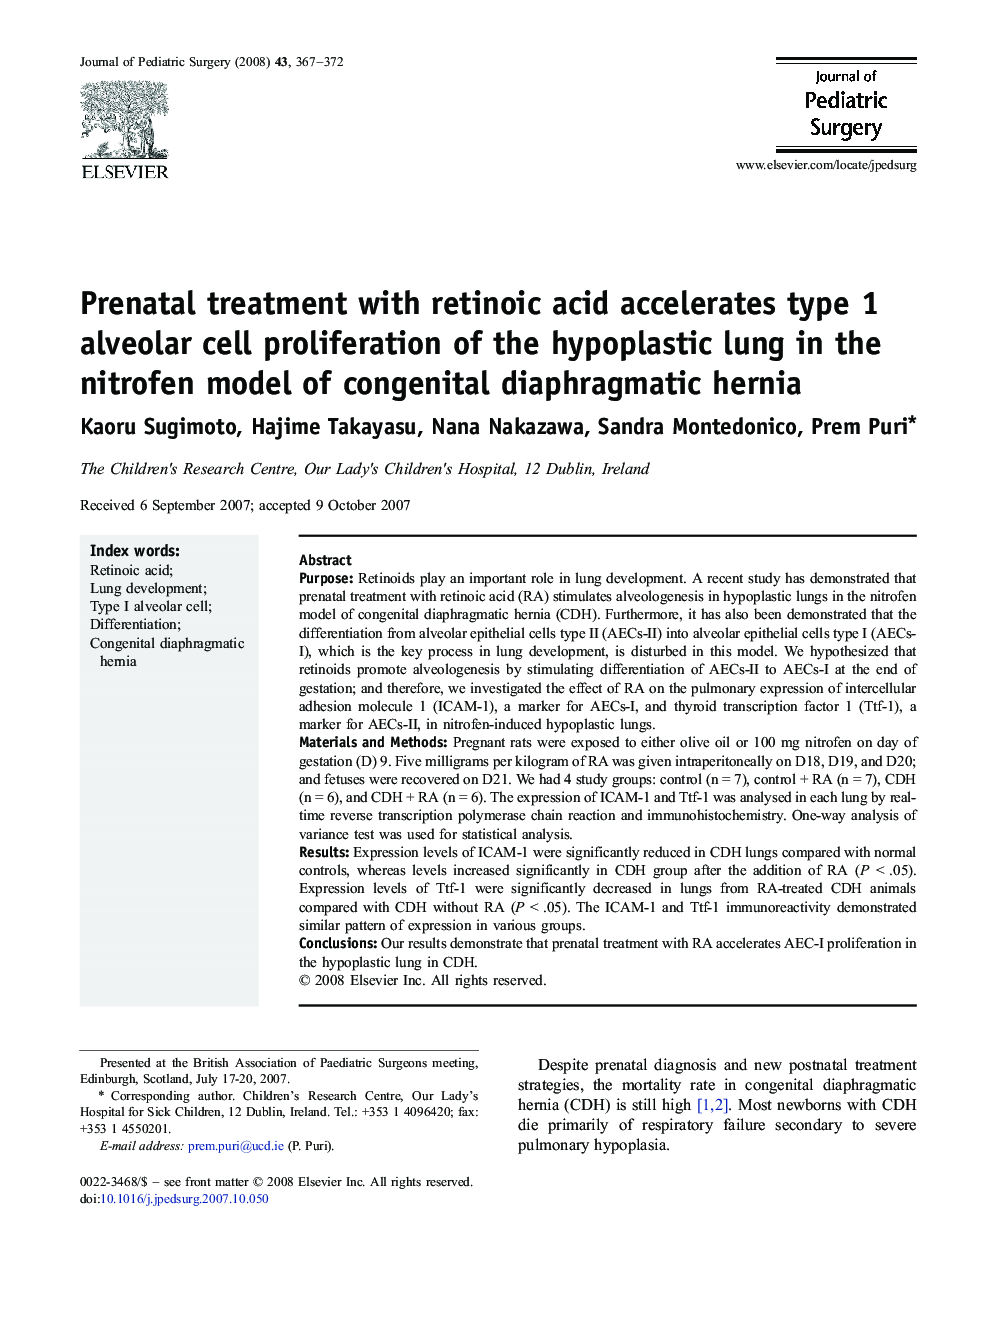 Prenatal treatment with retinoic acid accelerates type 1 alveolar cell proliferation of the hypoplastic lung in the nitrofen model of congenital diaphragmatic hernia 